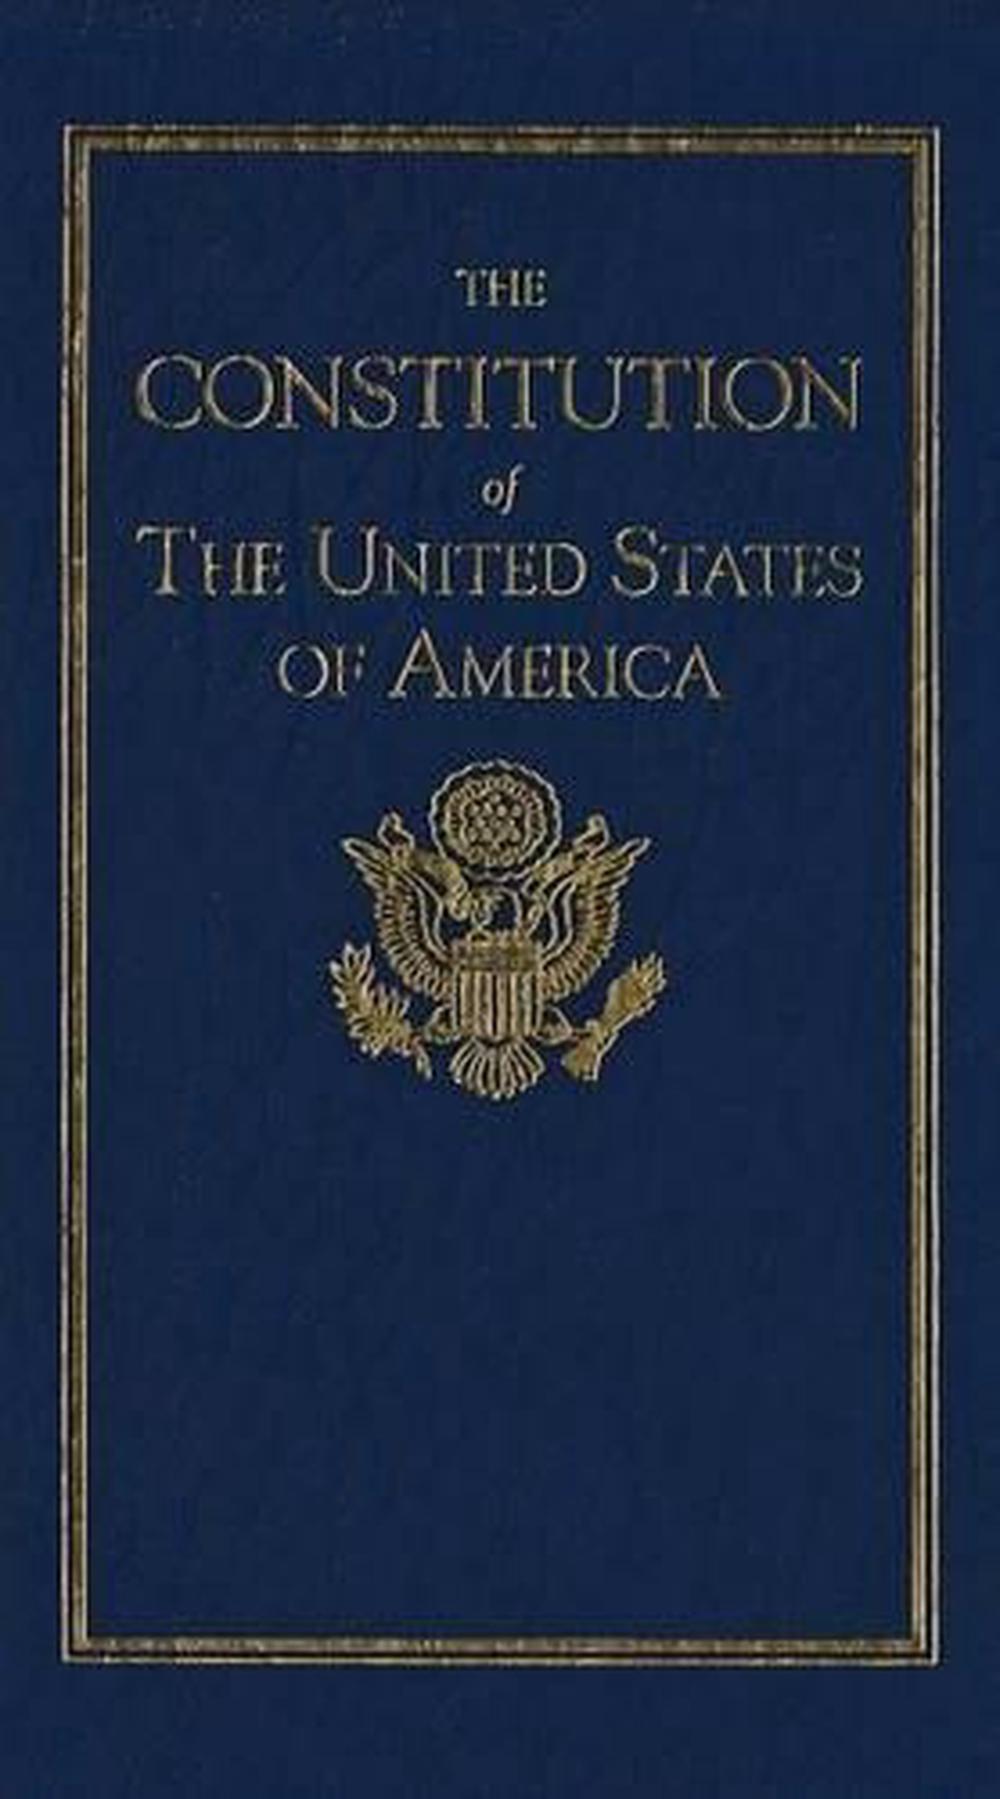 Constitution Of The United States English Hardcover Book Free Shipping 9781557091055 Ebay